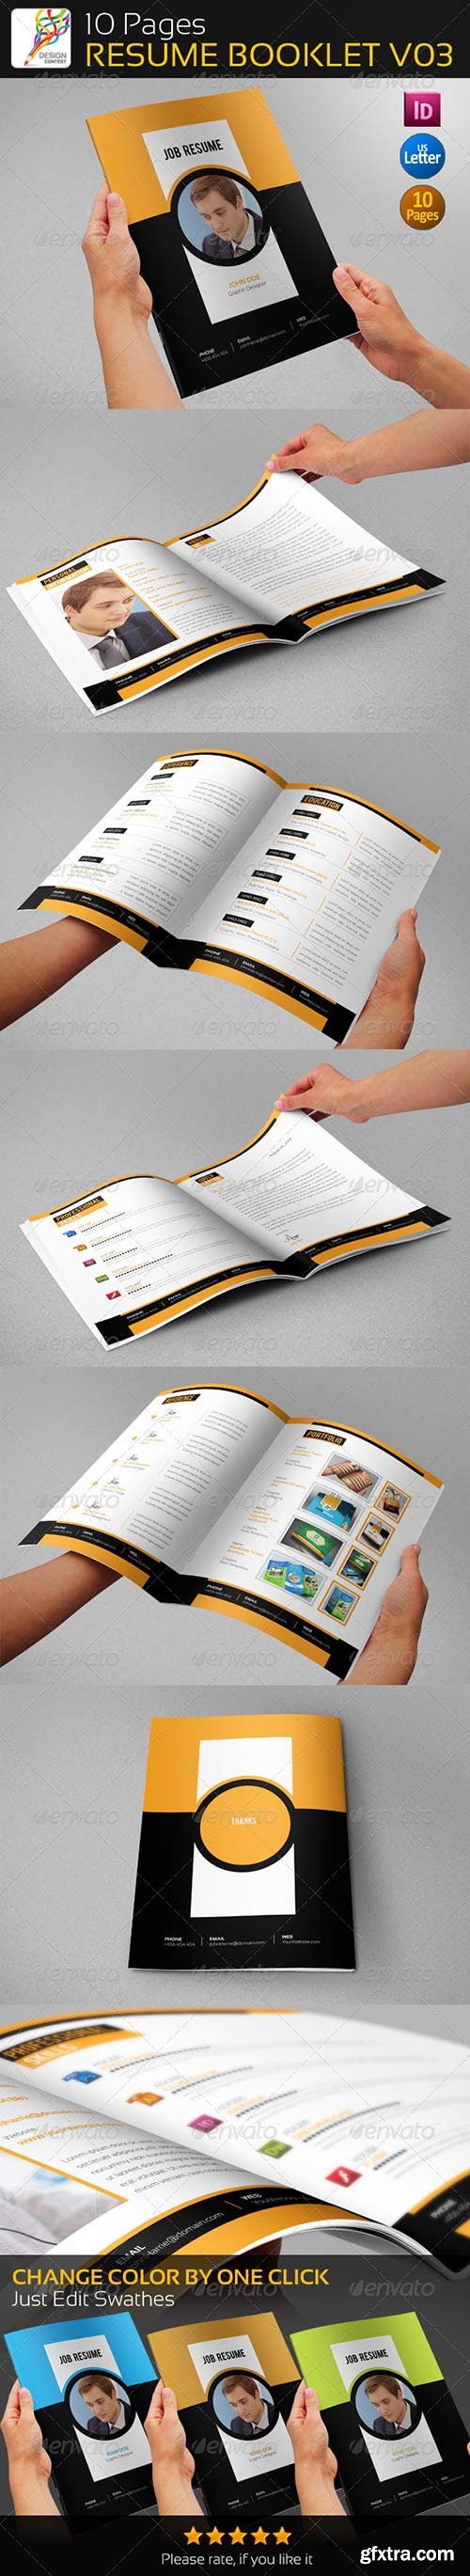 Graphicriver - 10 Pages Professional Resume Booklet V03 5424439